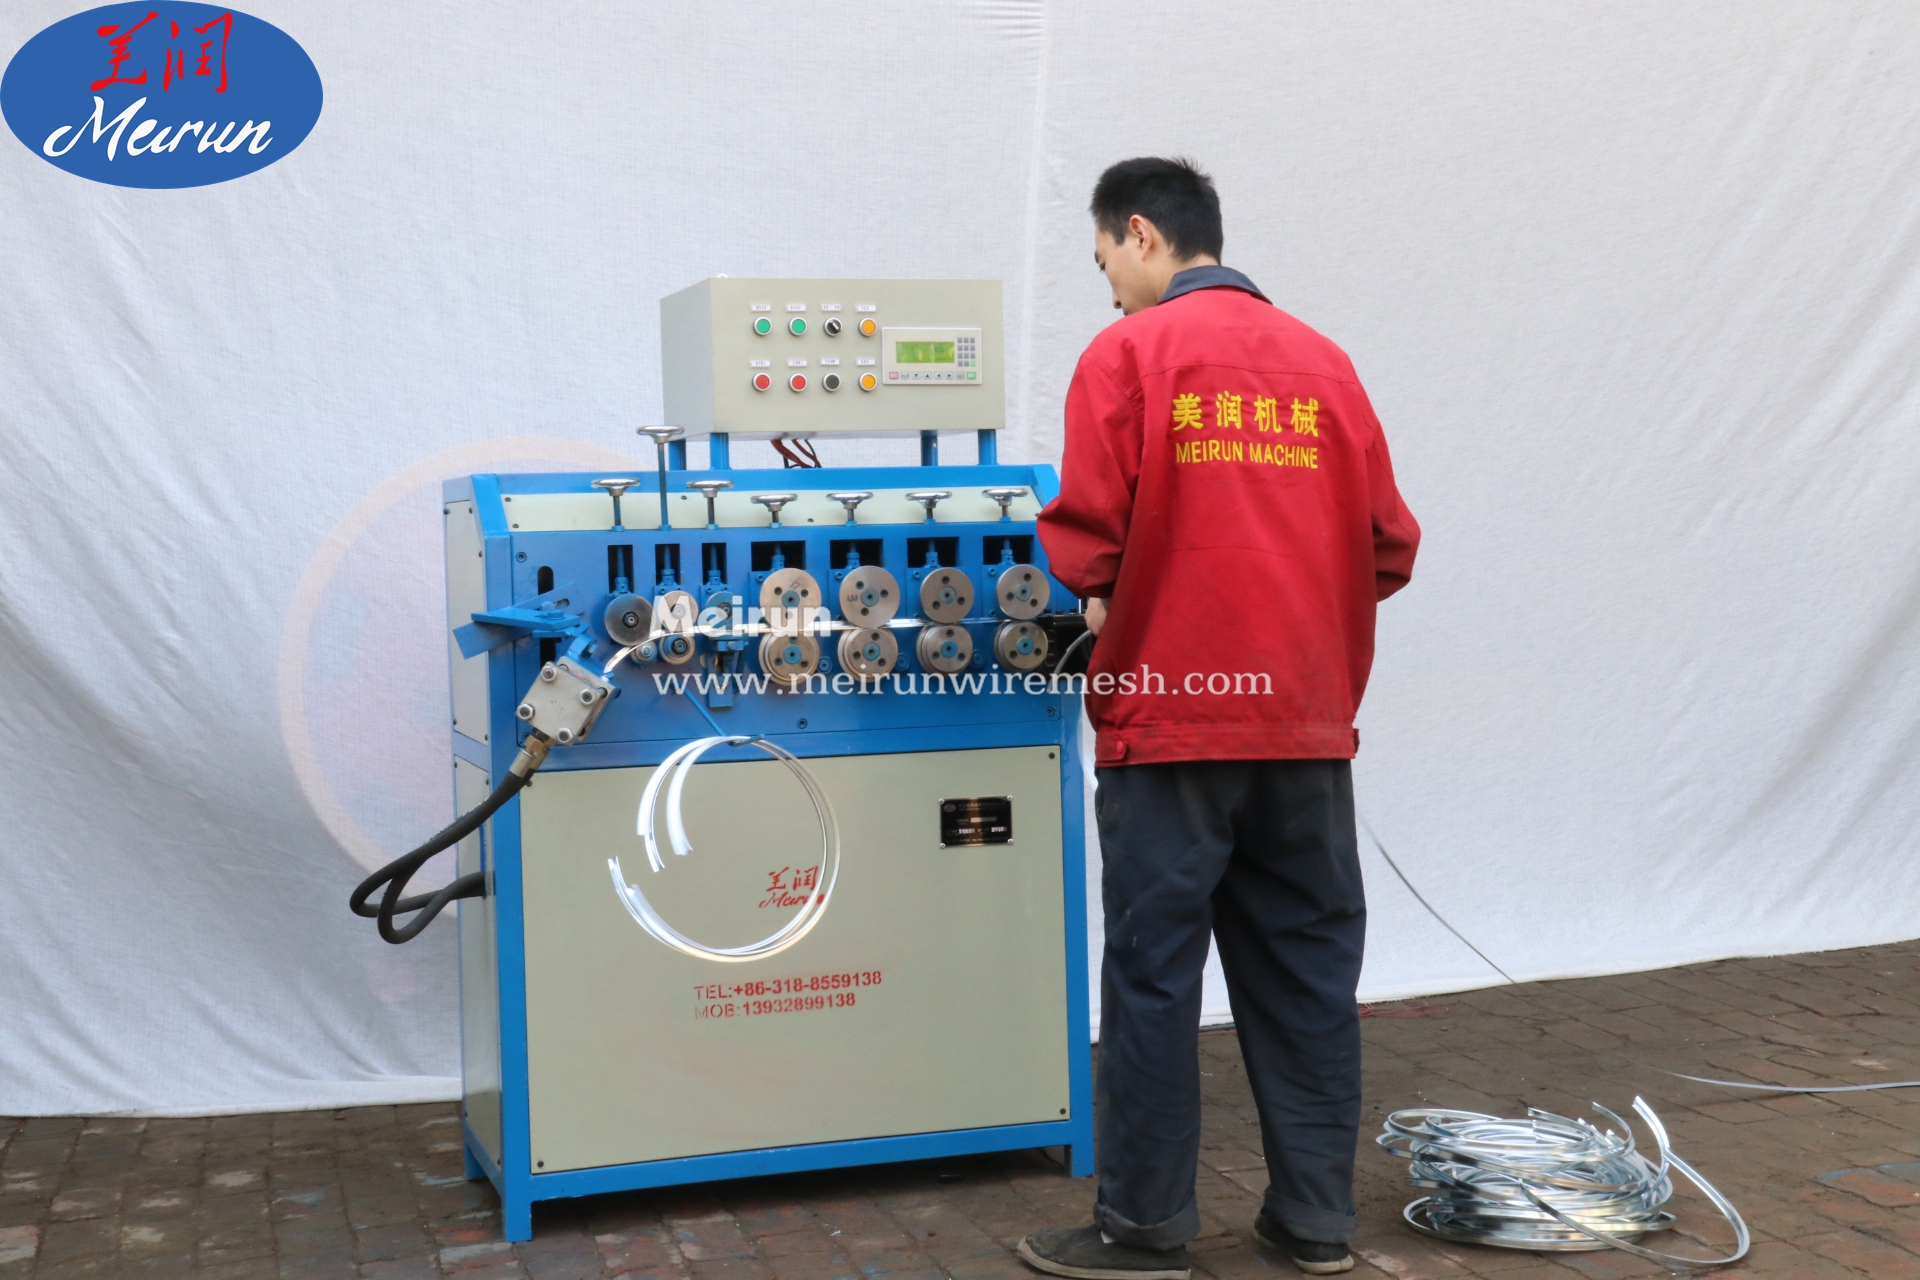 Popular in The World Roll Product Coiler Making Machine